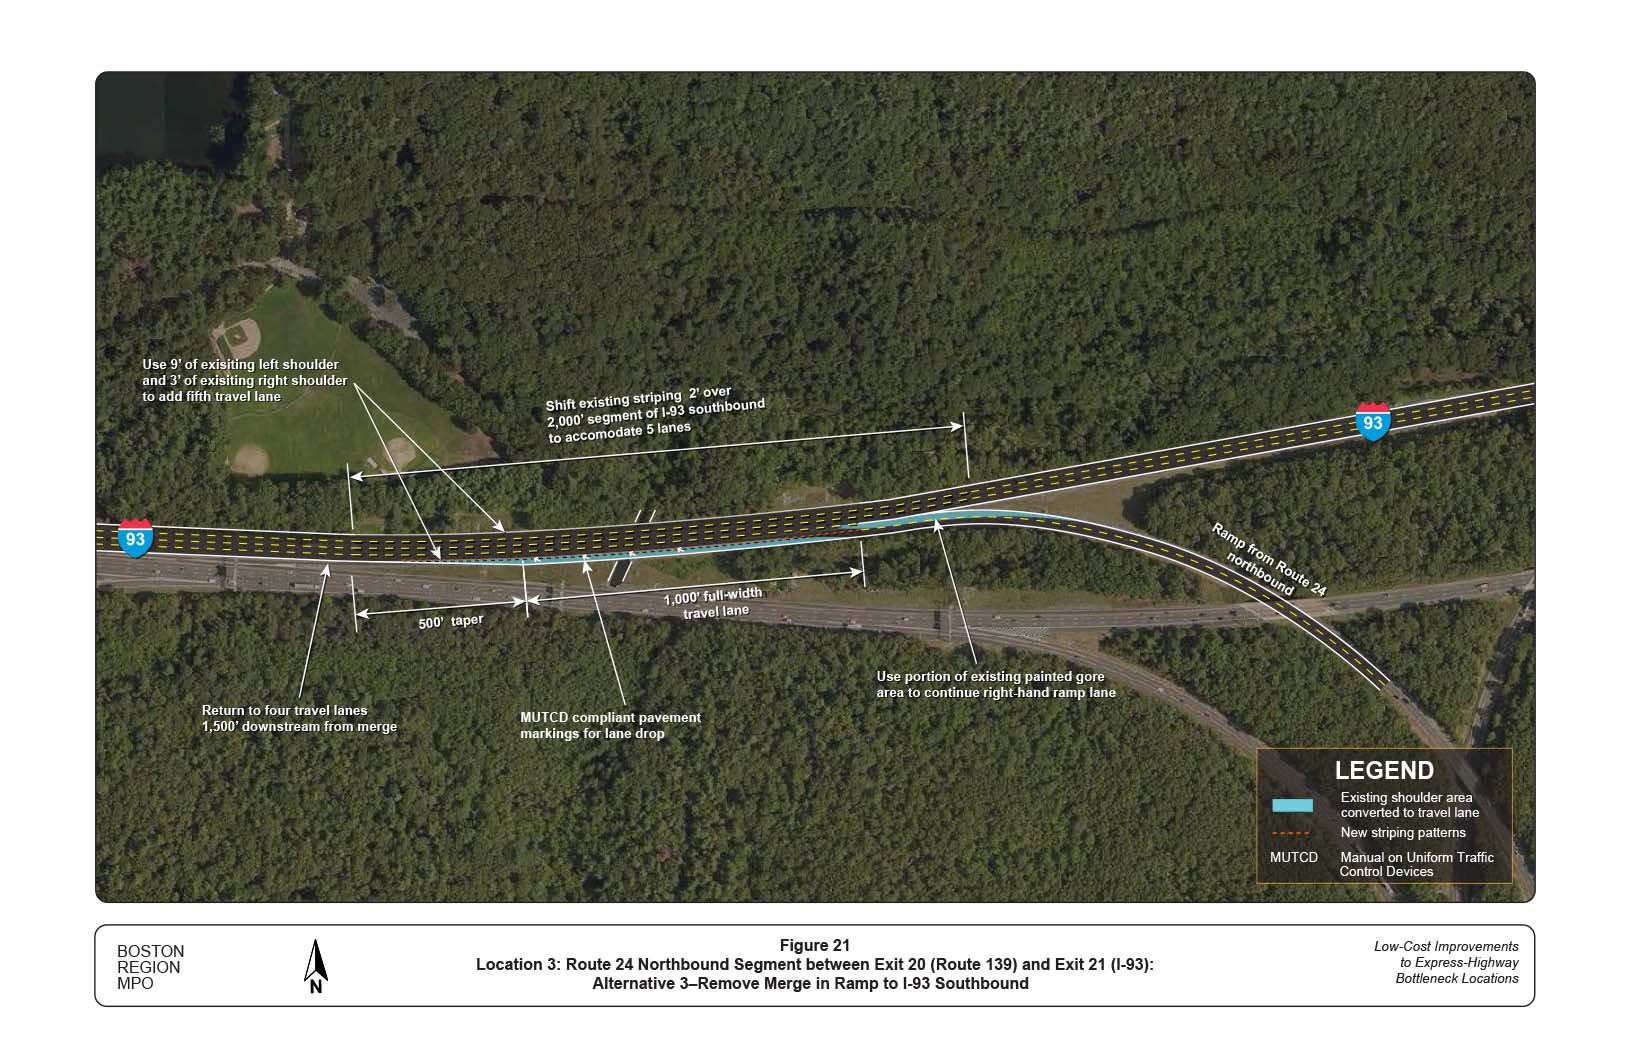 FIGURE 21. Location 3: Route 24 Northbound Segment between Exit 20 (Route 139) and Exit 21 (I-93): Alternative 3–Remove Merge in Ramp to I-93 Southbound
Figure 21 shows an alternative improvement in this location to address safety and operational issues at the bottleneck. The figure shows the removal of the merge in the ramp on I-93 Southbound and the addition of an acceleration lane for the leftmost lane.
